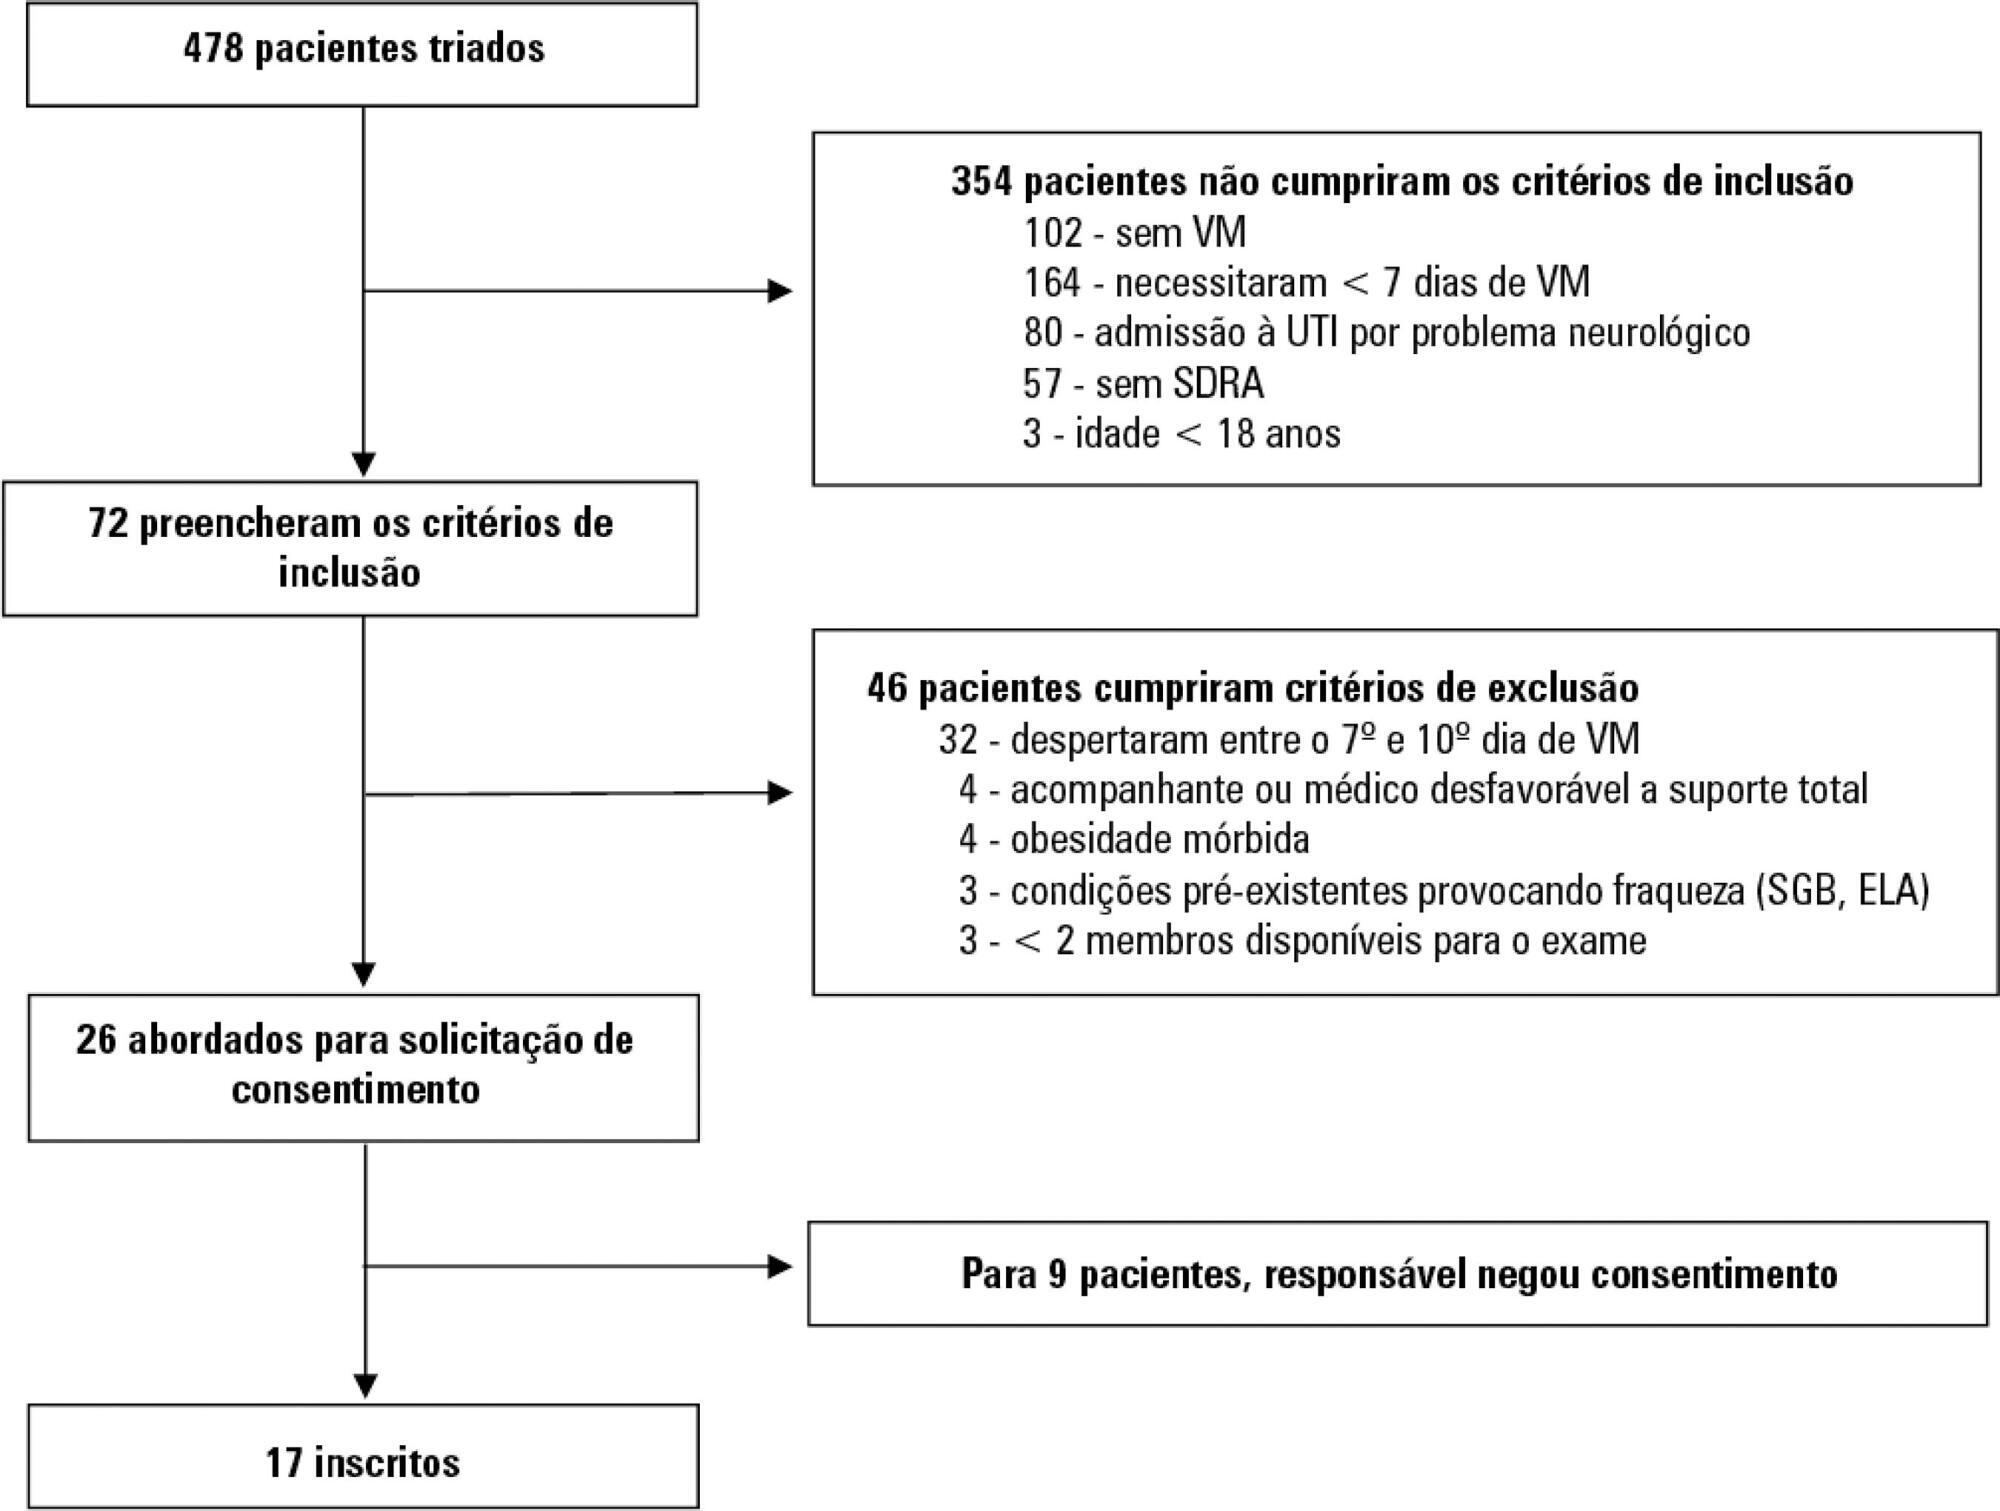 Association between electromyographical findings and intensive care unit mortality among mechanically ventilated acute respiratory distress syndrome patients under profound sedation